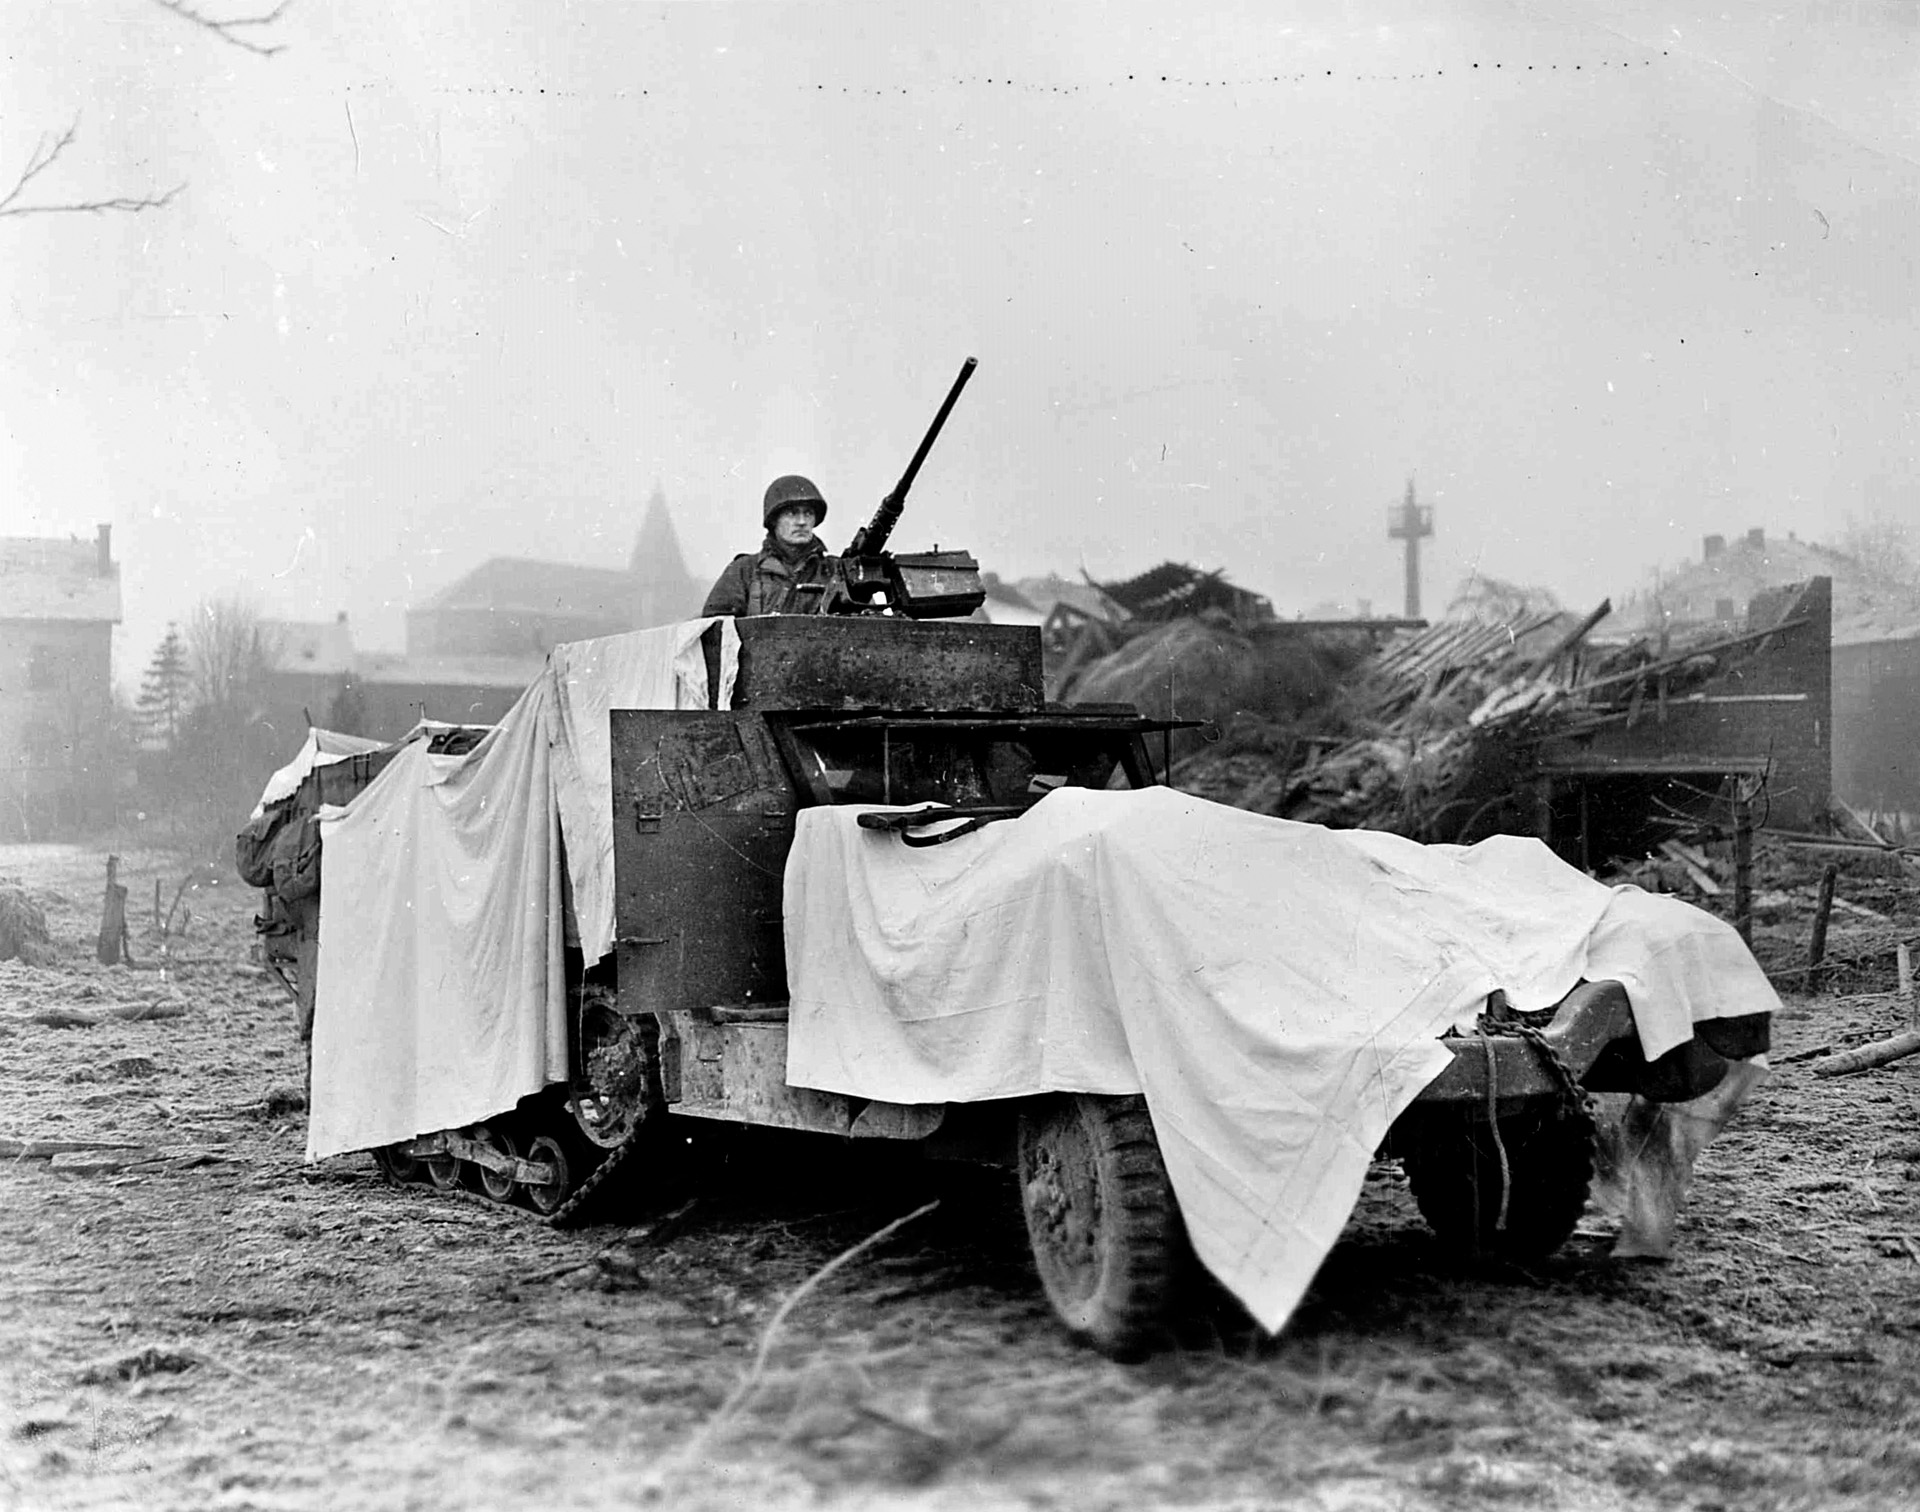 10th Armored Division crewman Walter Streetman mans his .50-caliber machine gun during the fighting around Bastogne. His vehicle is camouflaged with white sheets in an effort to blend in with the expected coming snow. 